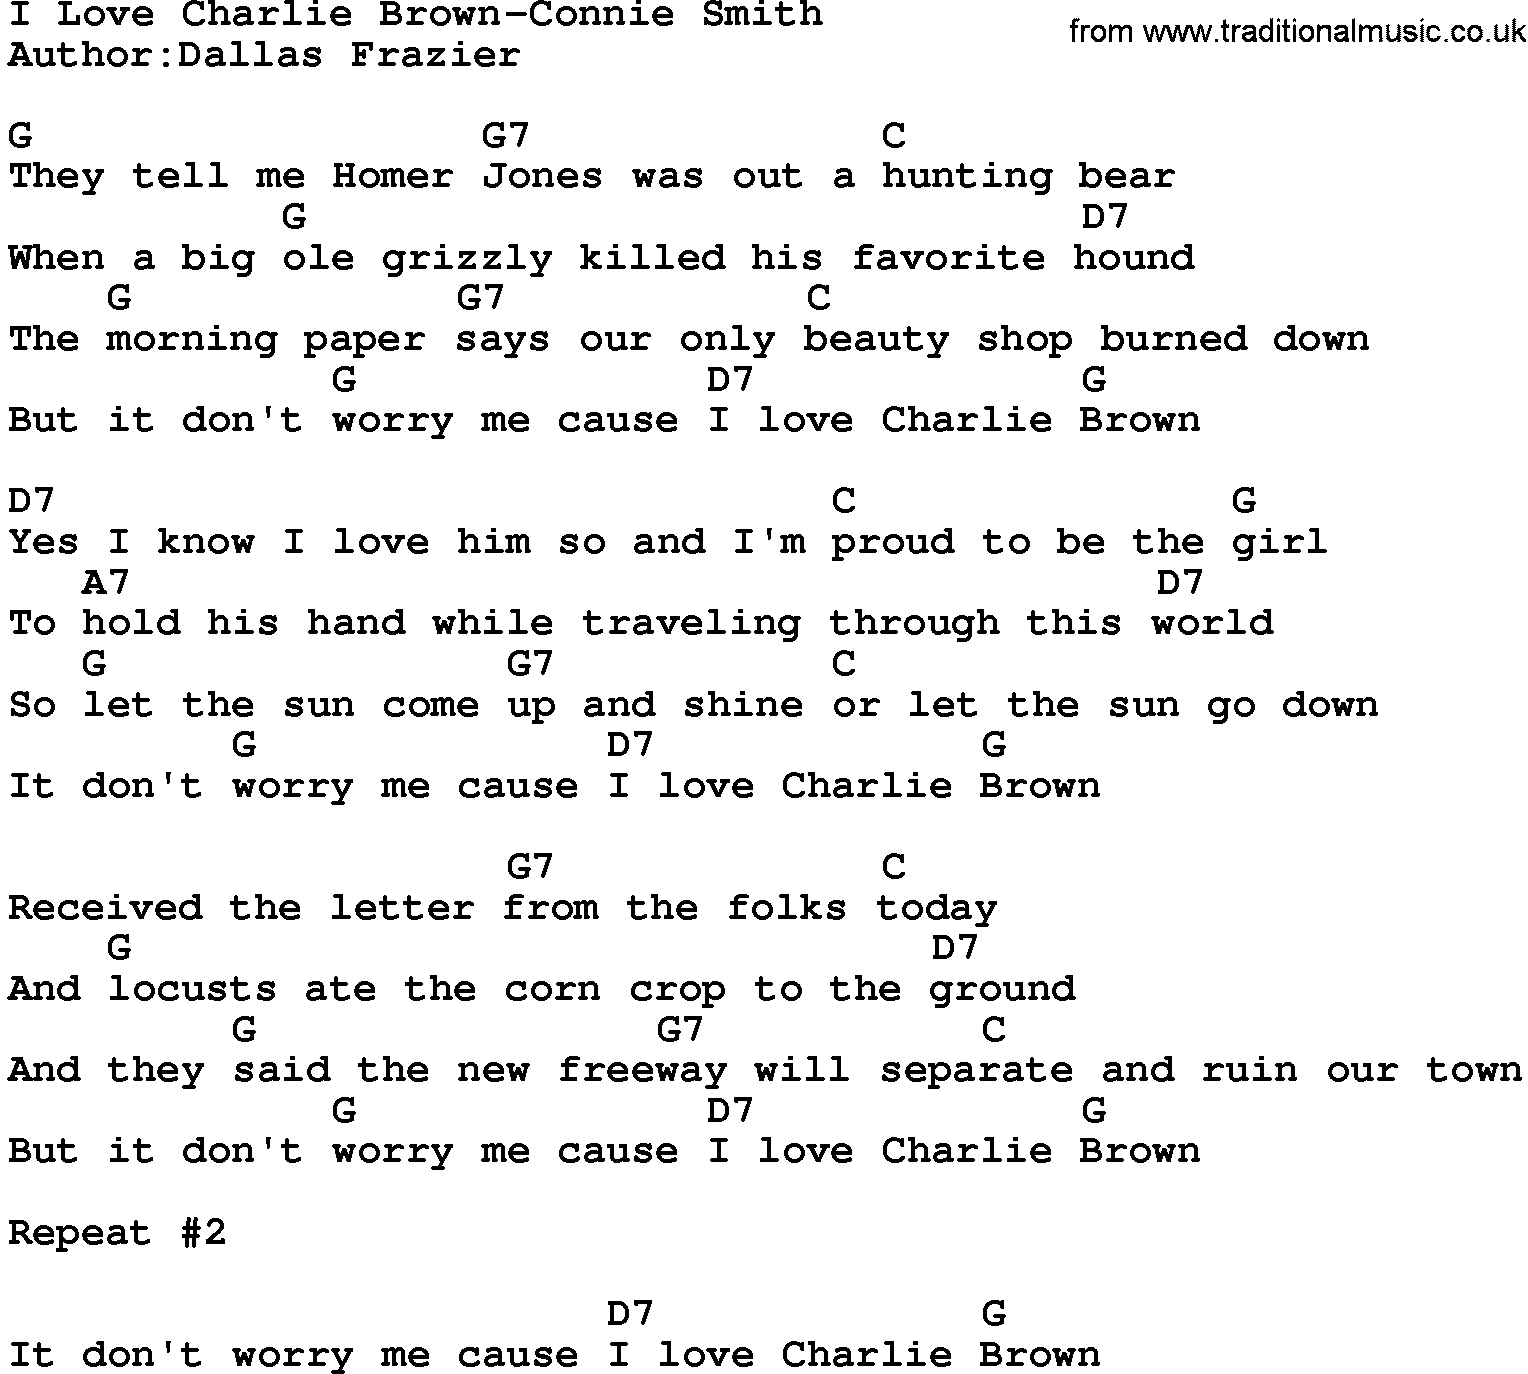 Country music song: I Love Charlie Brown-Connie Smith lyrics and chords